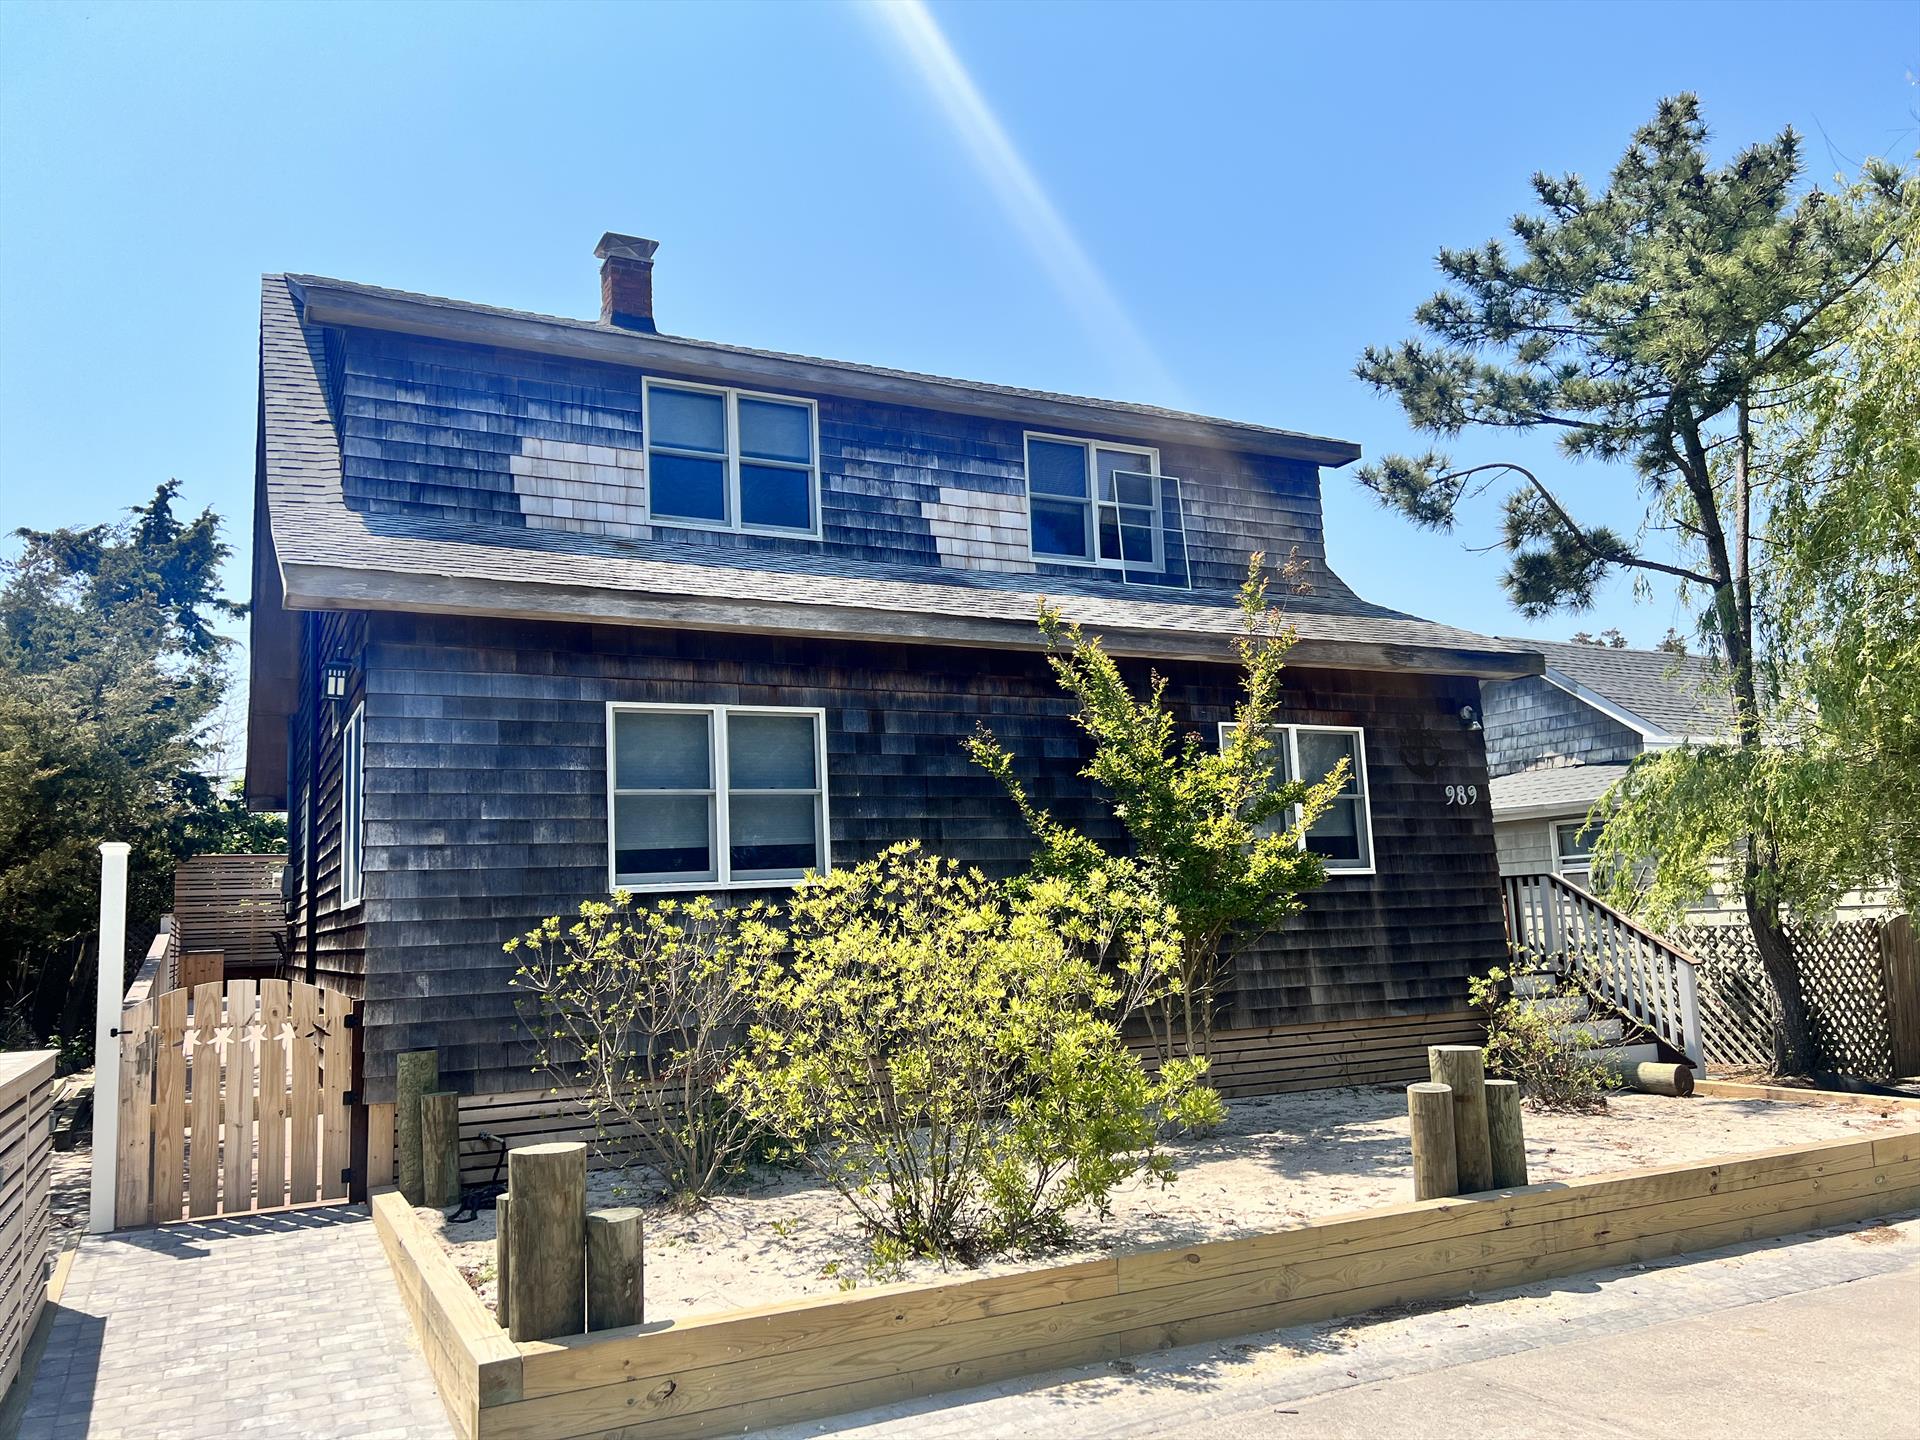 4 bedroom, 2 bath, steps to the beach home. Located in Ocean Beach and next to Seaview.
Large deck, outdoor shower, hot tub, A/C, Satellite TV, etc. <b>
<b>
